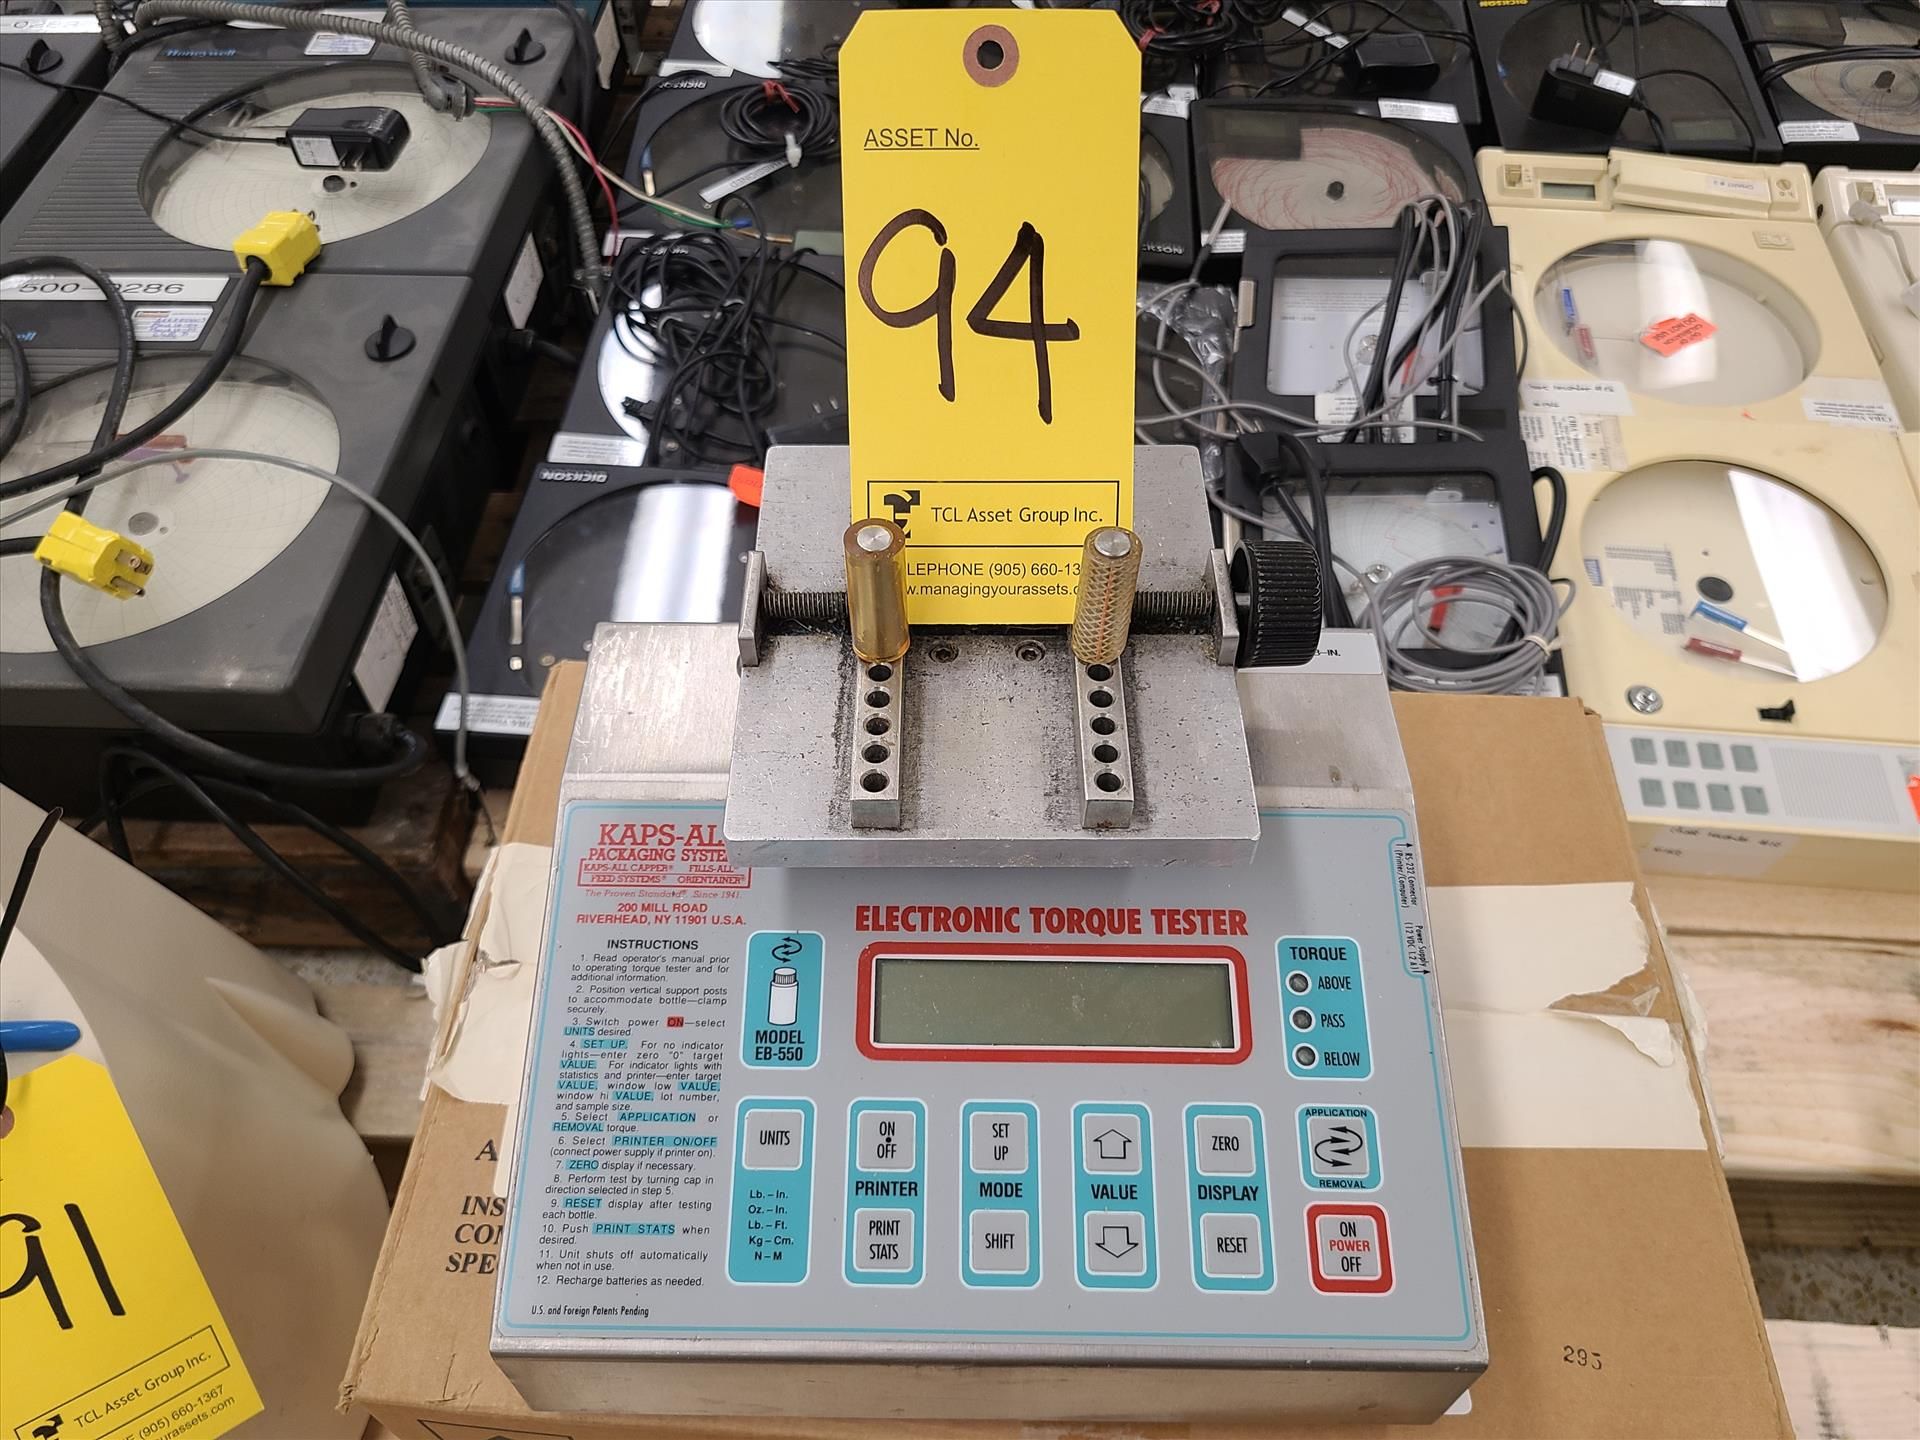 Kaps-all packaging system electronic torque tester, mod. EB-550, ser. no. 9377